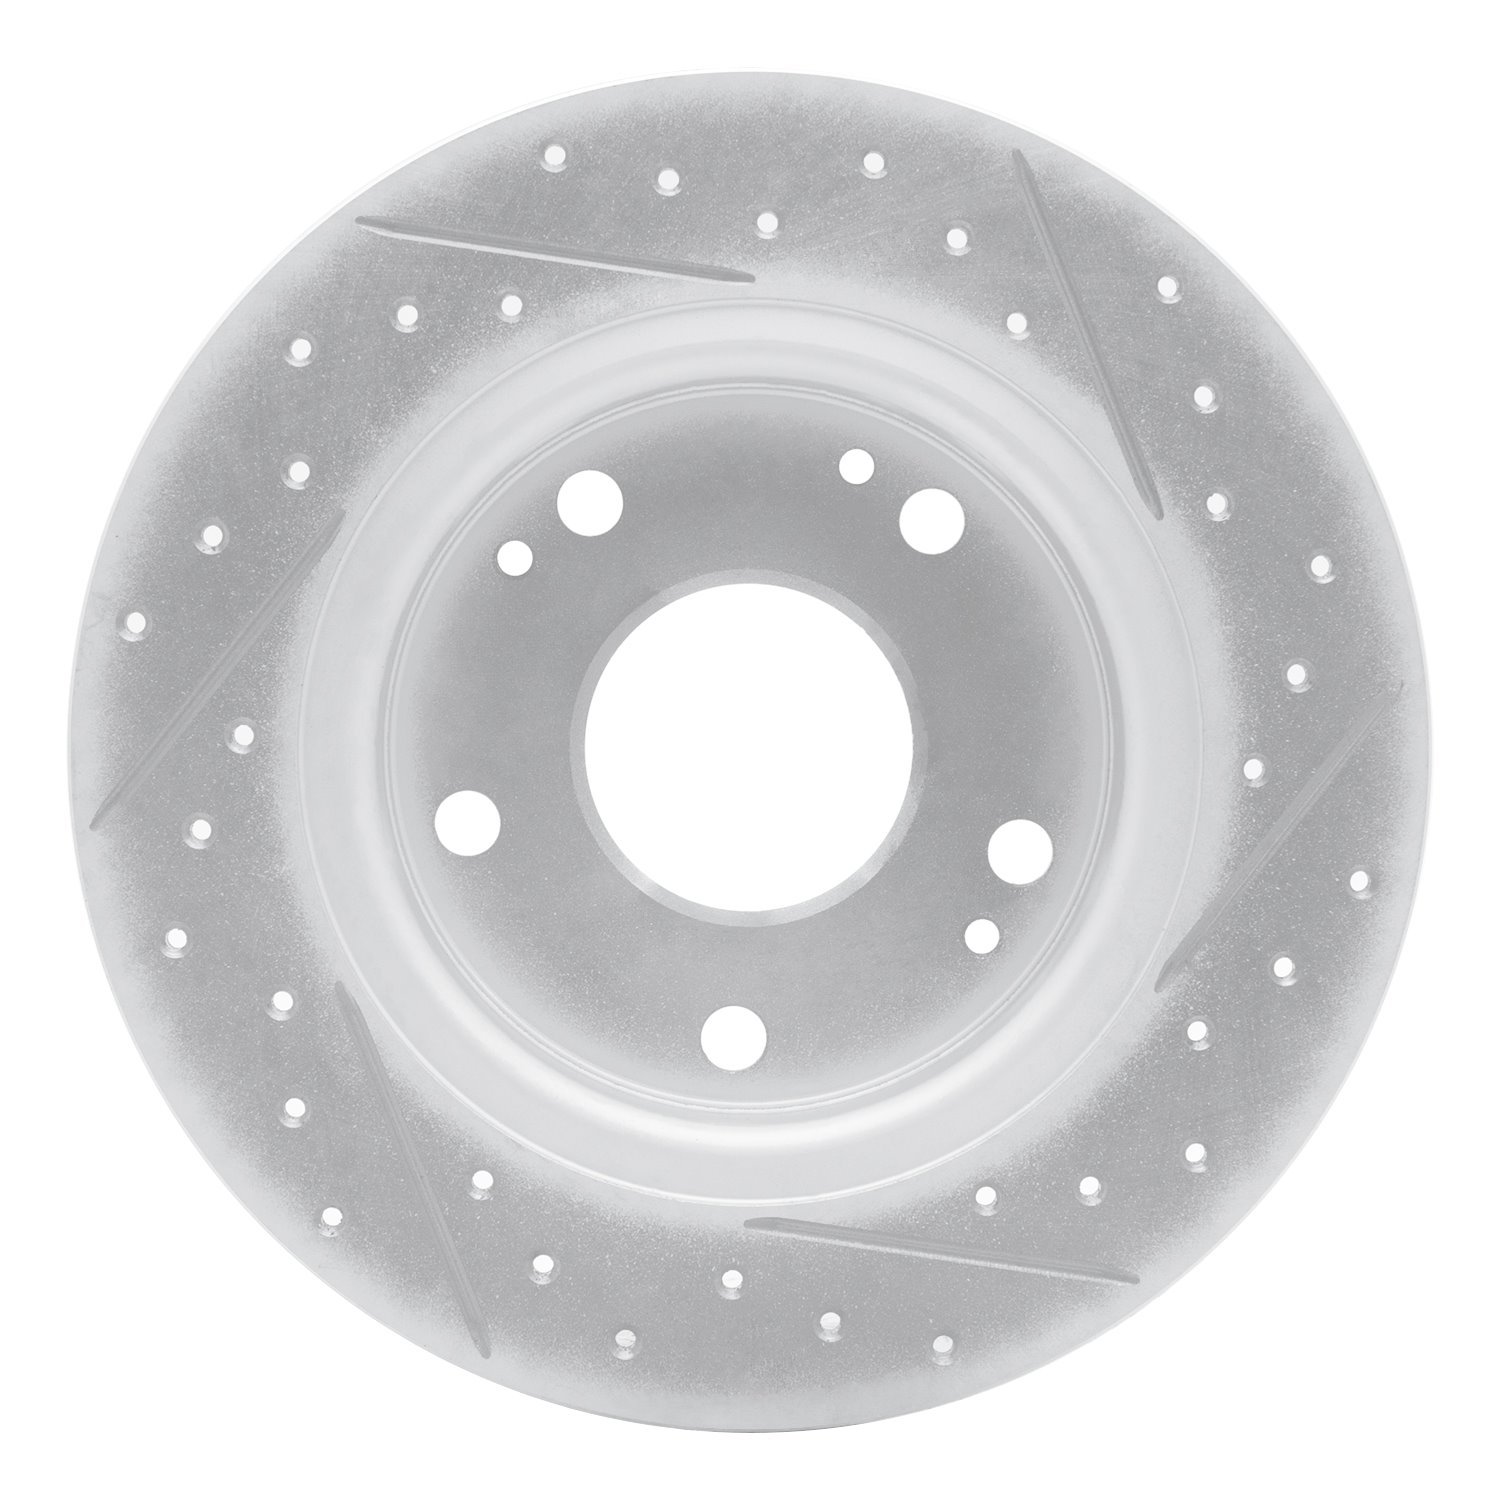 830-59059L Geoperformance Drilled/Slotted Brake Rotor, Fits Select Acura/Honda, Position: Rear Left